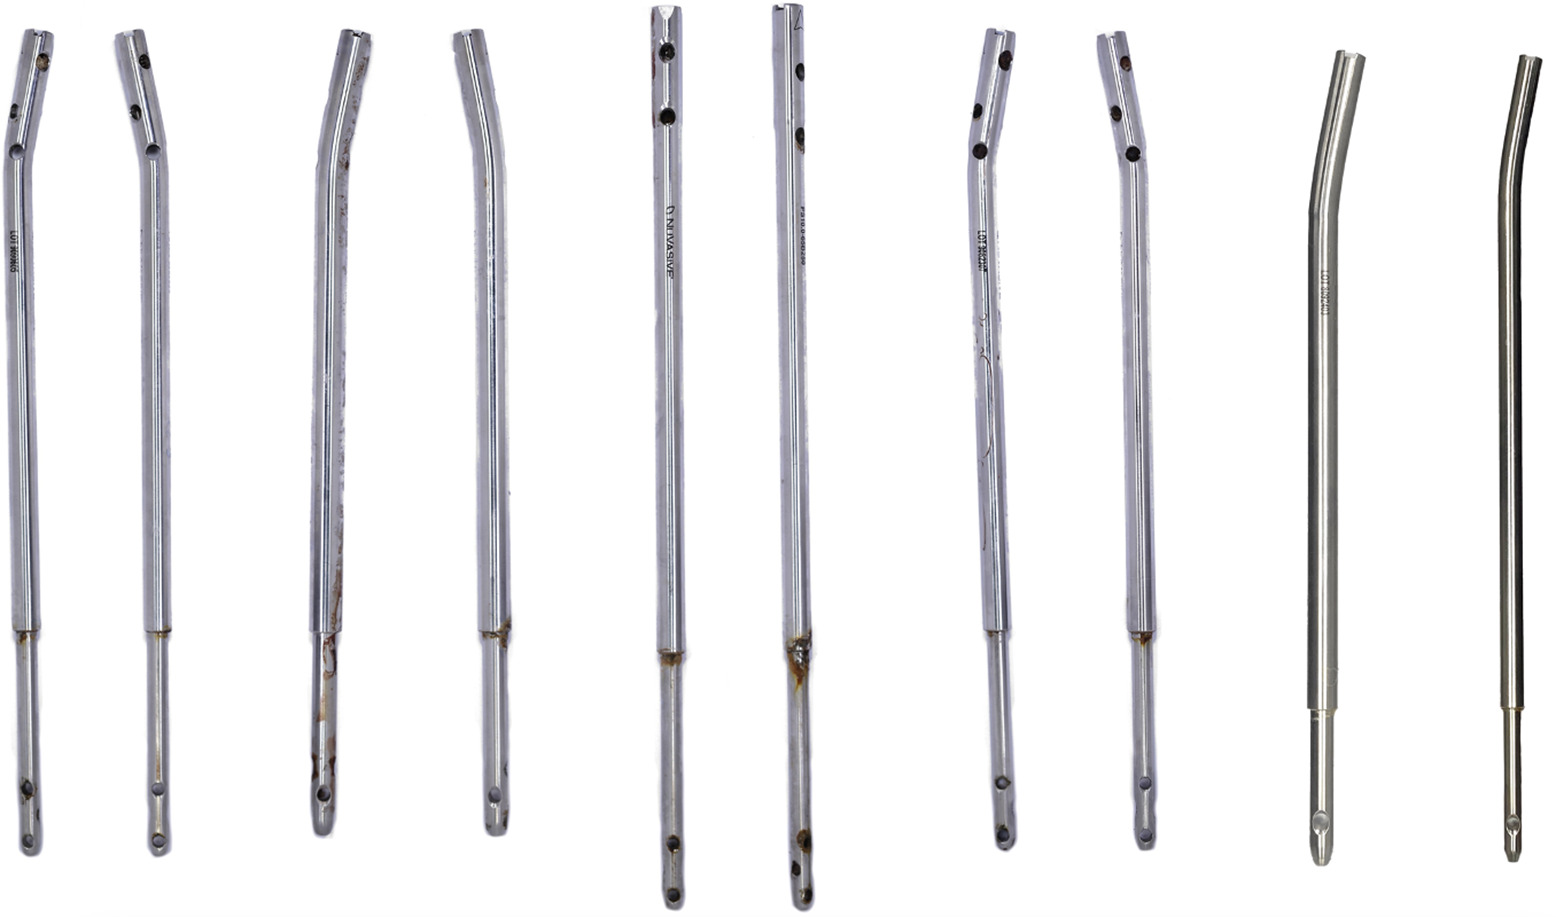 Fig. 1 
          Macroscopic images of all ten nails examined in this study. There are no indications of gross mechanical damage and macroscopically discolouration of the surface is observed around the junction of the housing tube and distraction rod, the distraction rod itself, and the screw holes.
        